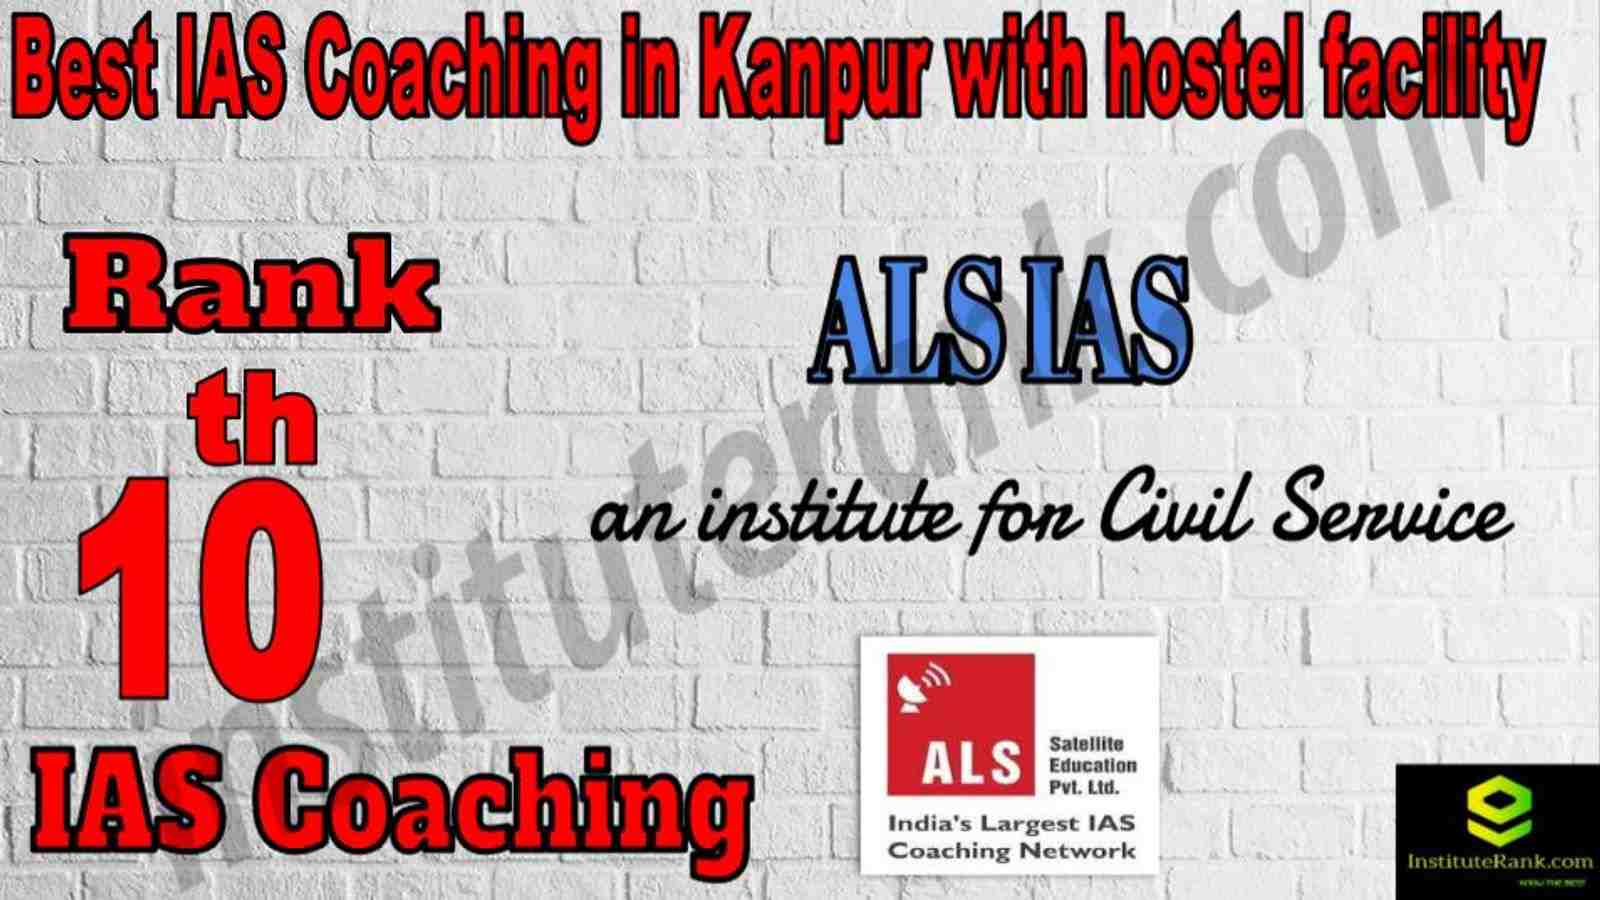 10th Best IAS Coaching in Kanpur With hostel facility